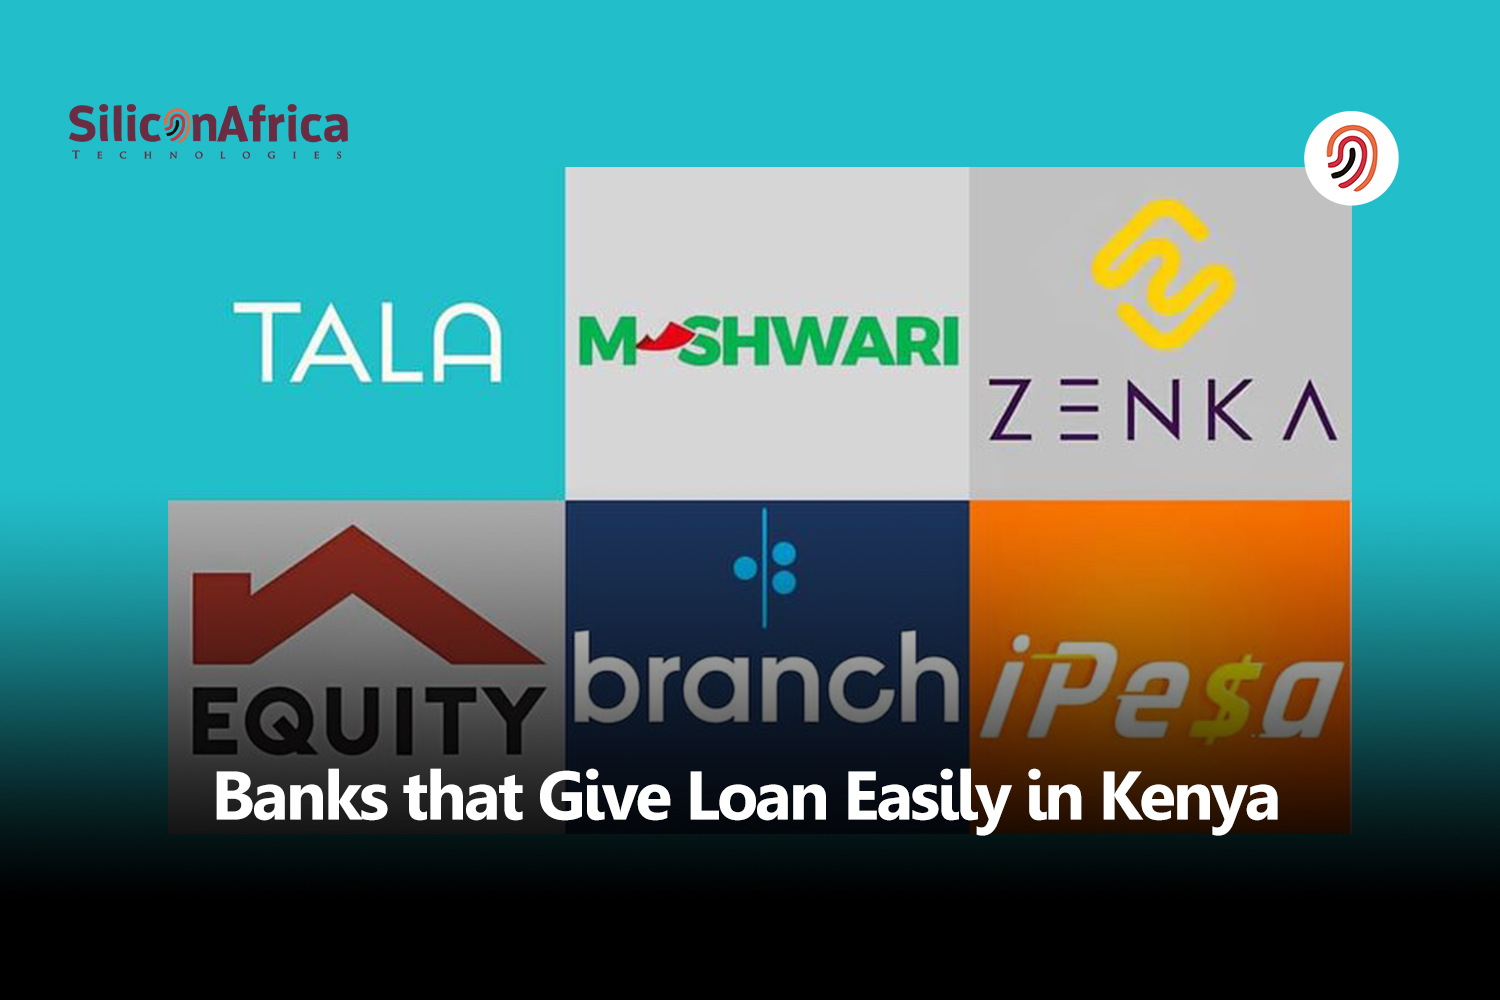 which bank gives loan easily in kenya